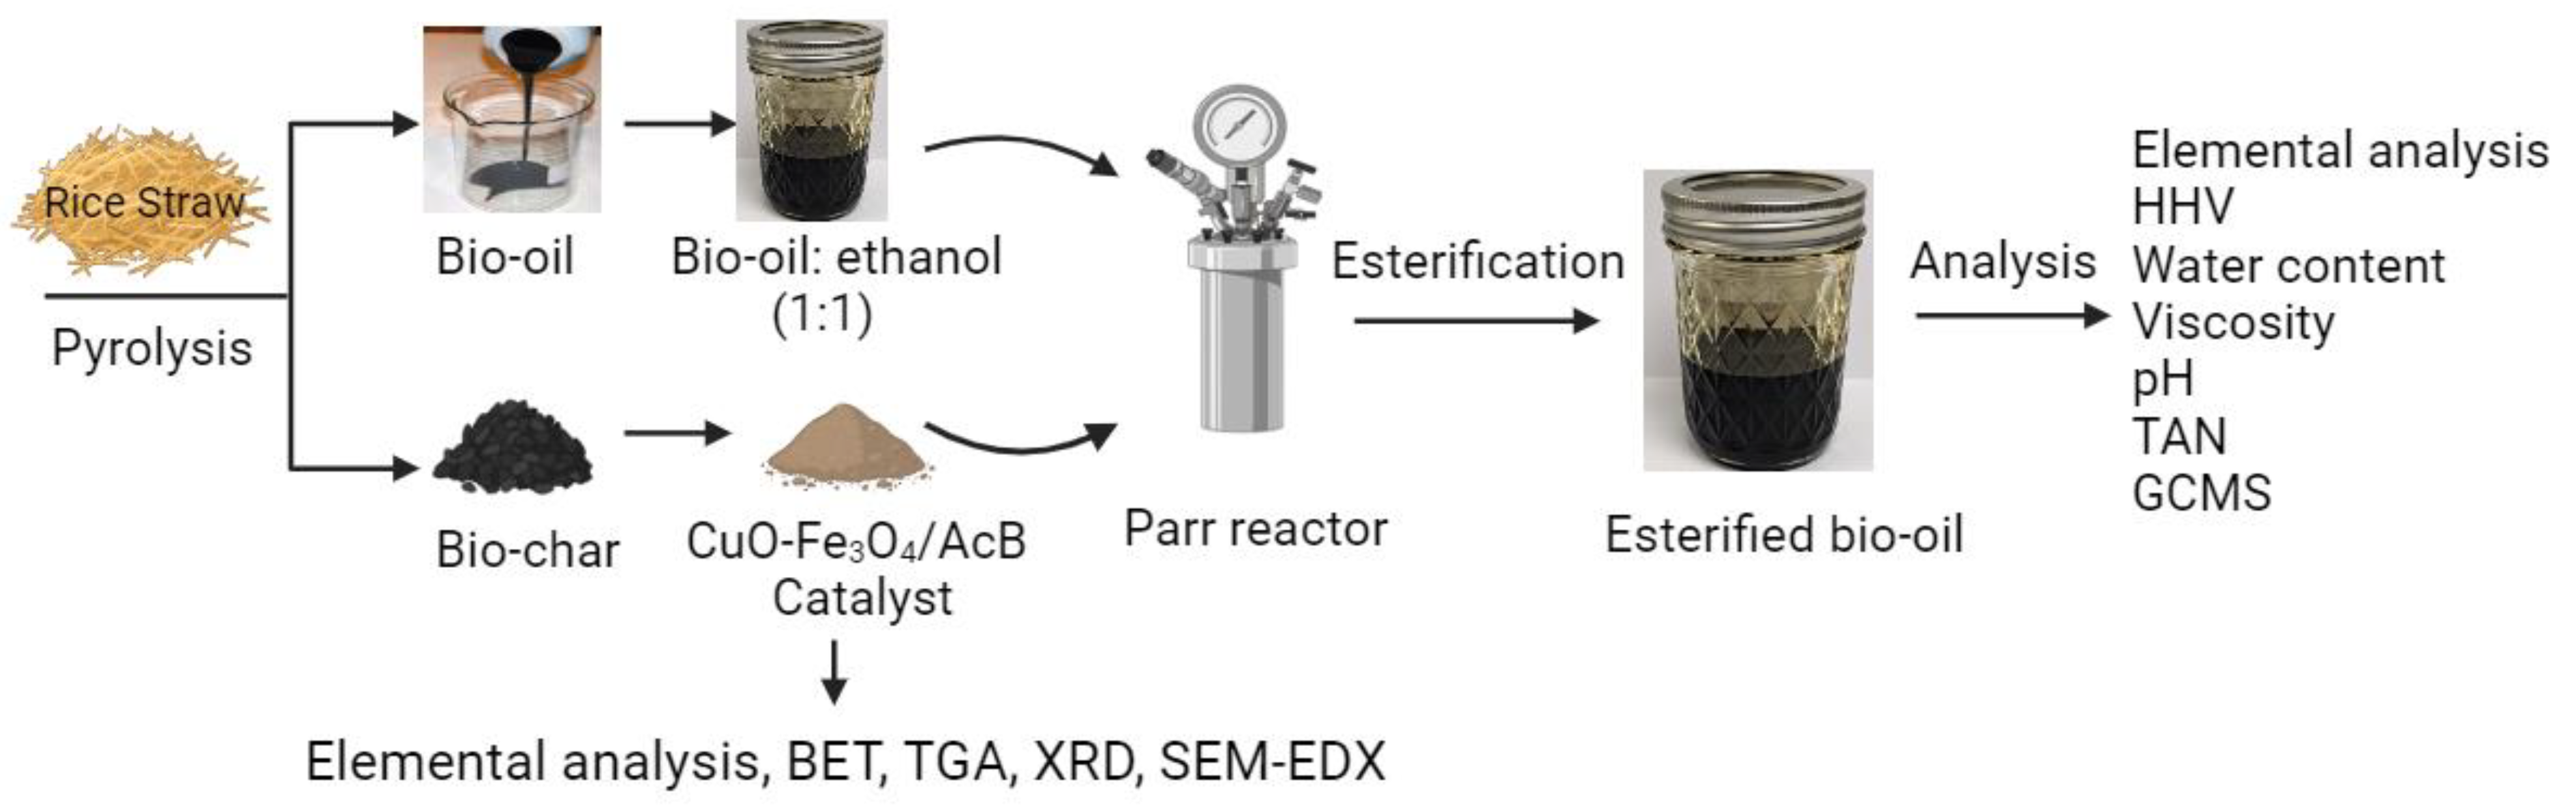 Electrochemical transformations of fast pyrolysis bio-oils and